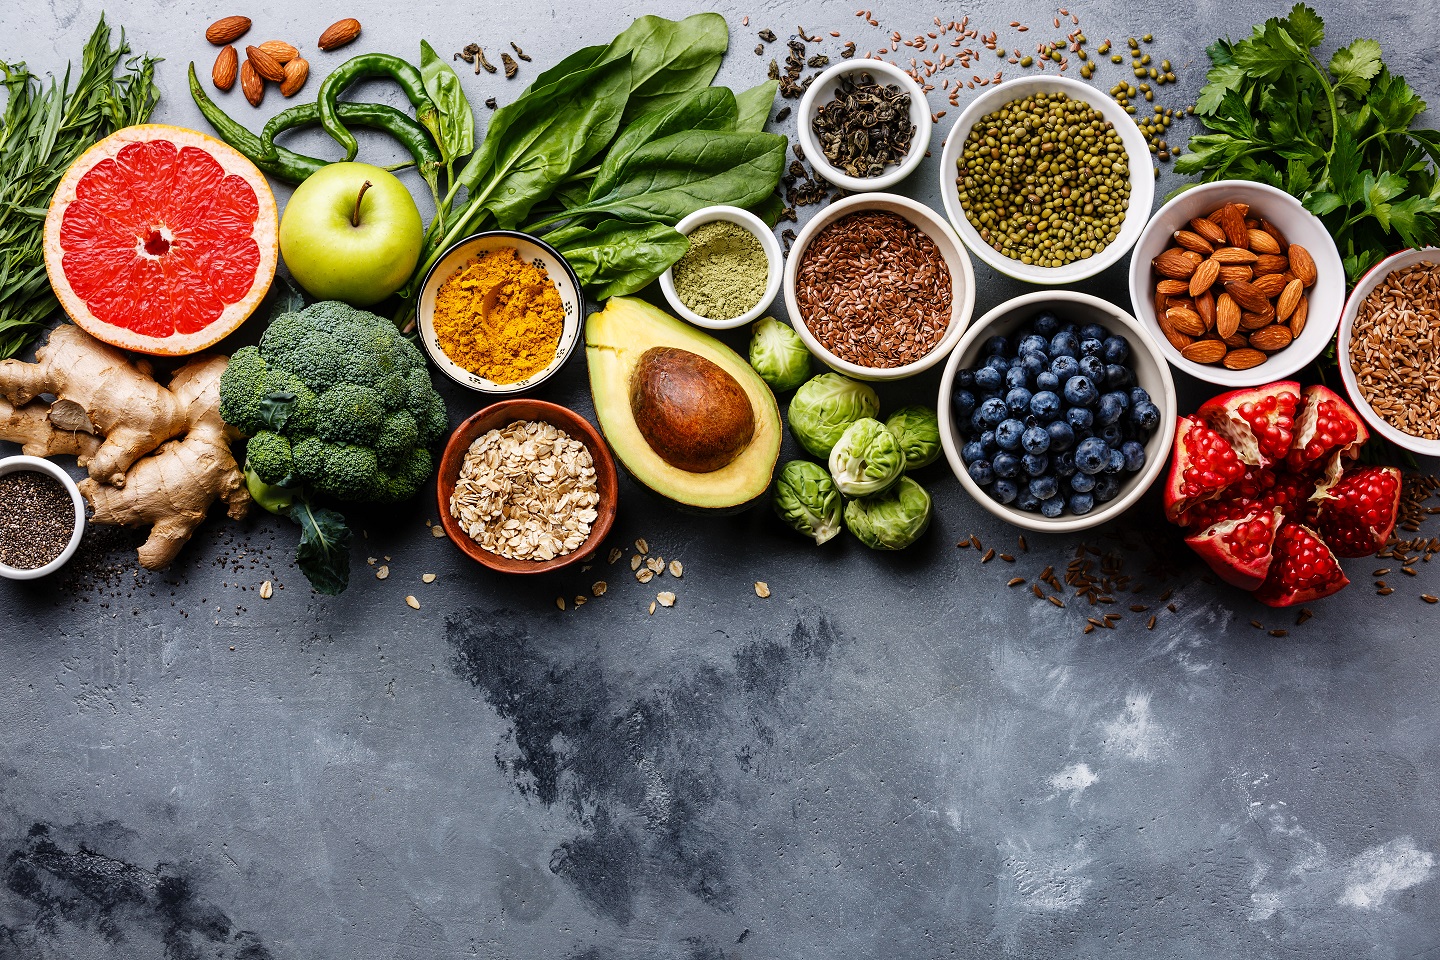 Taste experts reveal sports nutrition flavour inspirations for 2020